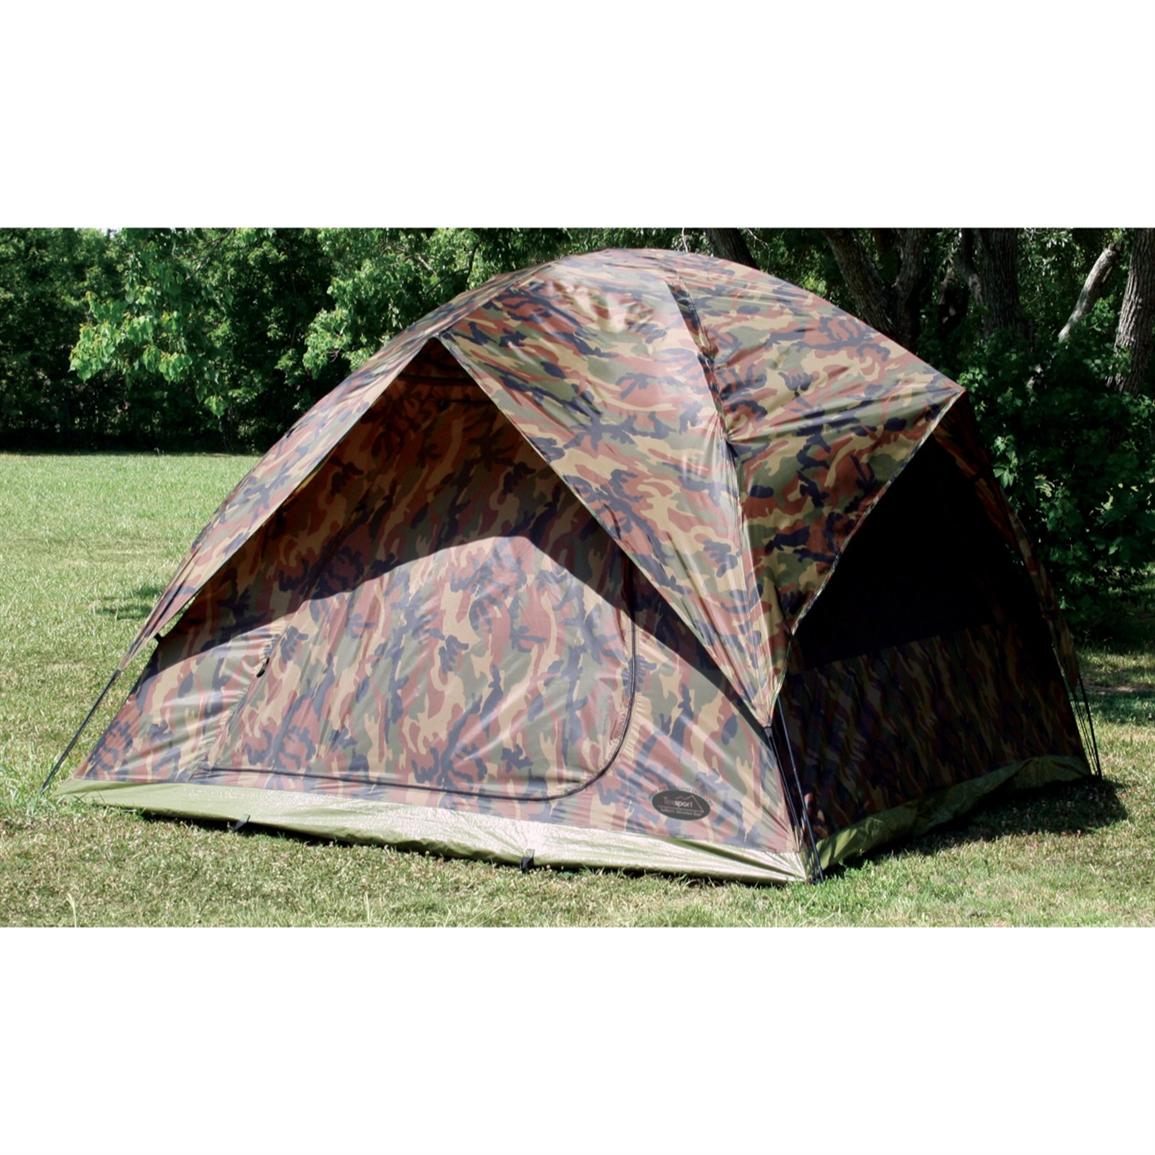 Texsport Headquarters Camouflage 5-Person Dome Tent